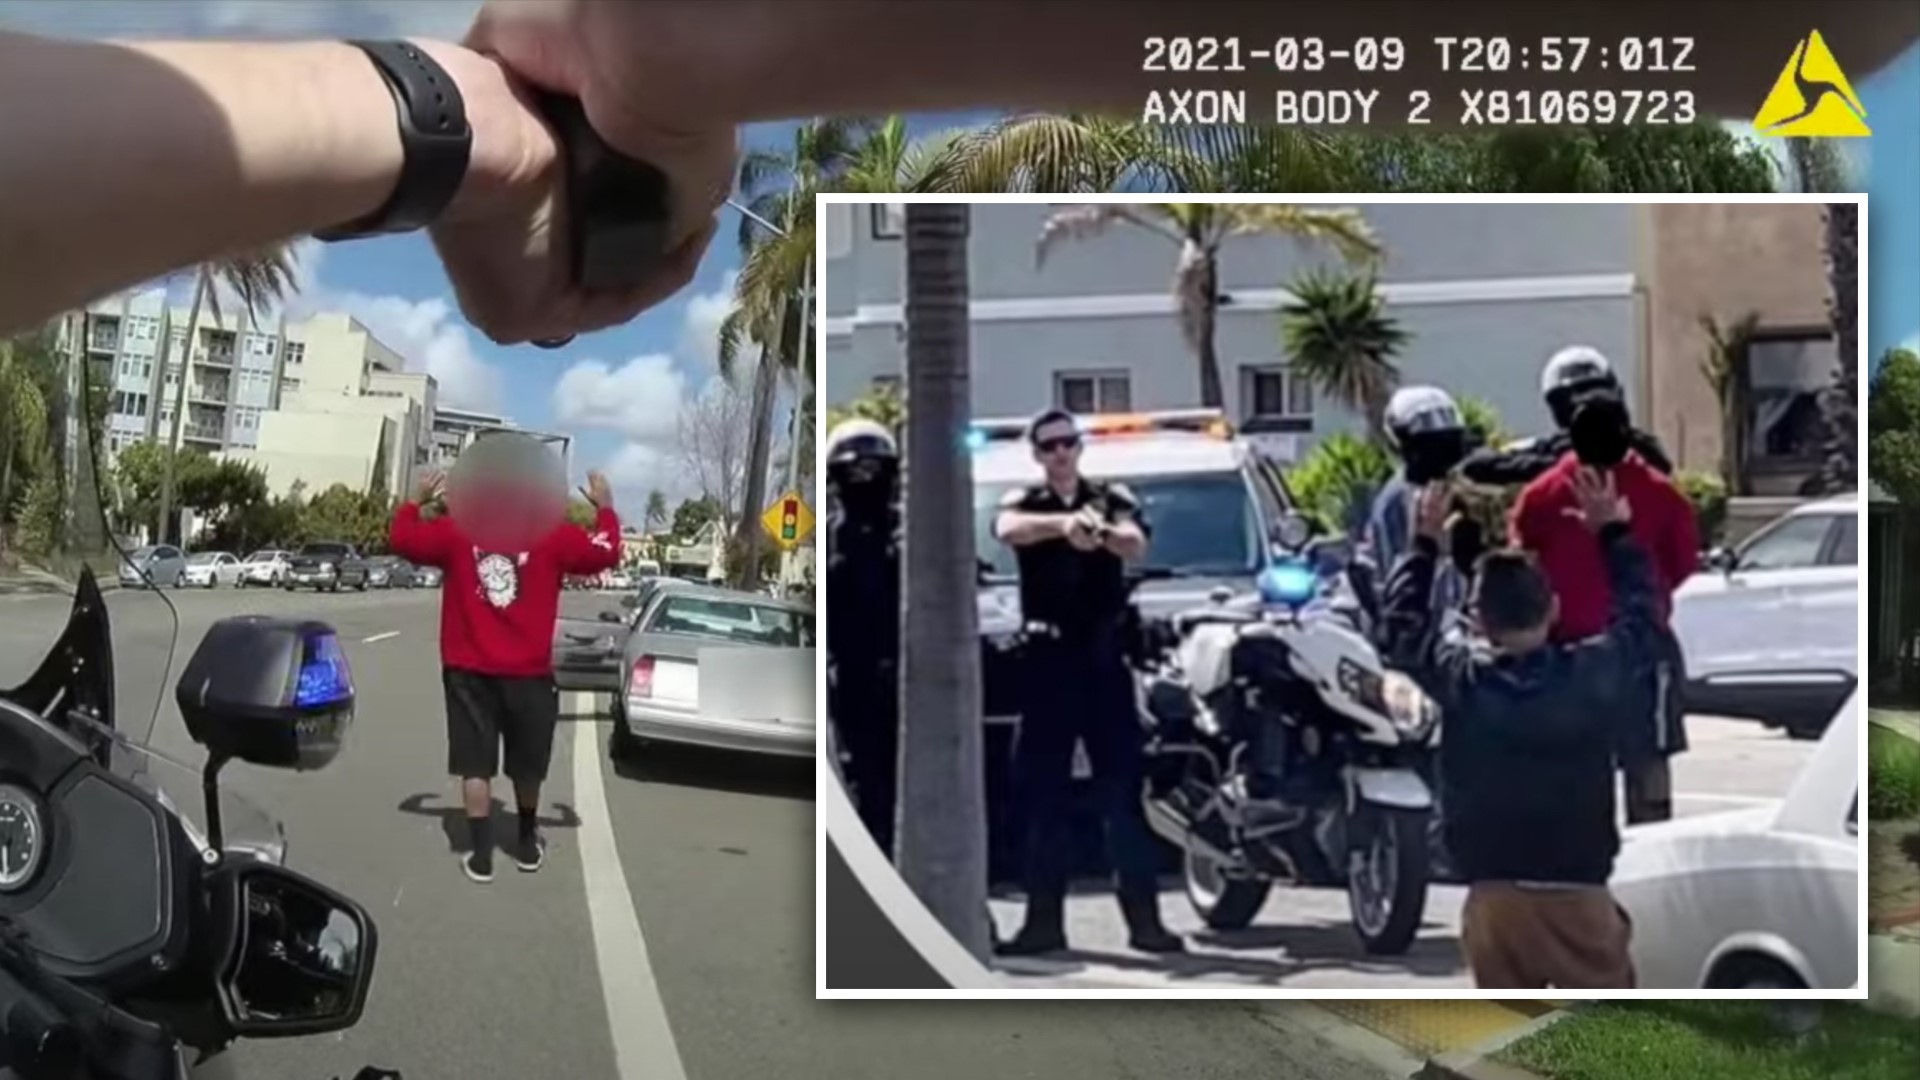 After speculation on social media that an officer pointed his gun directly at an 8-year-old boy during a traffic stop, SDPD released the incident's body-cam footage.